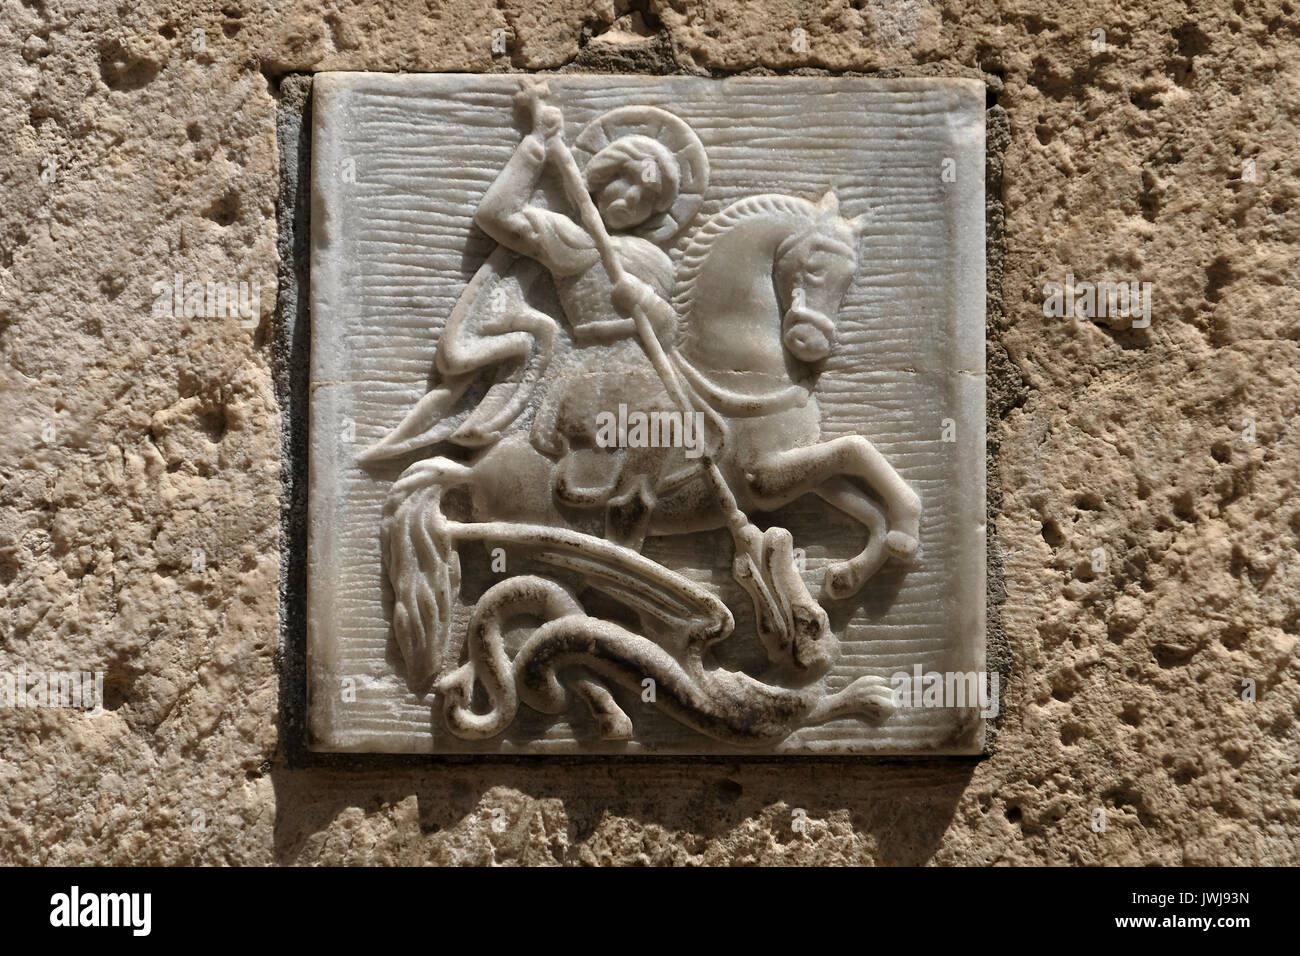 A carved figure depicting an orthodox Christian legend in which Saint George slays a dragon that demanded human sacrifices at entrance to the St. George Monastery in Saint Francis street in the Christian Quarter old city East Jerusalem Israel Stock Photo